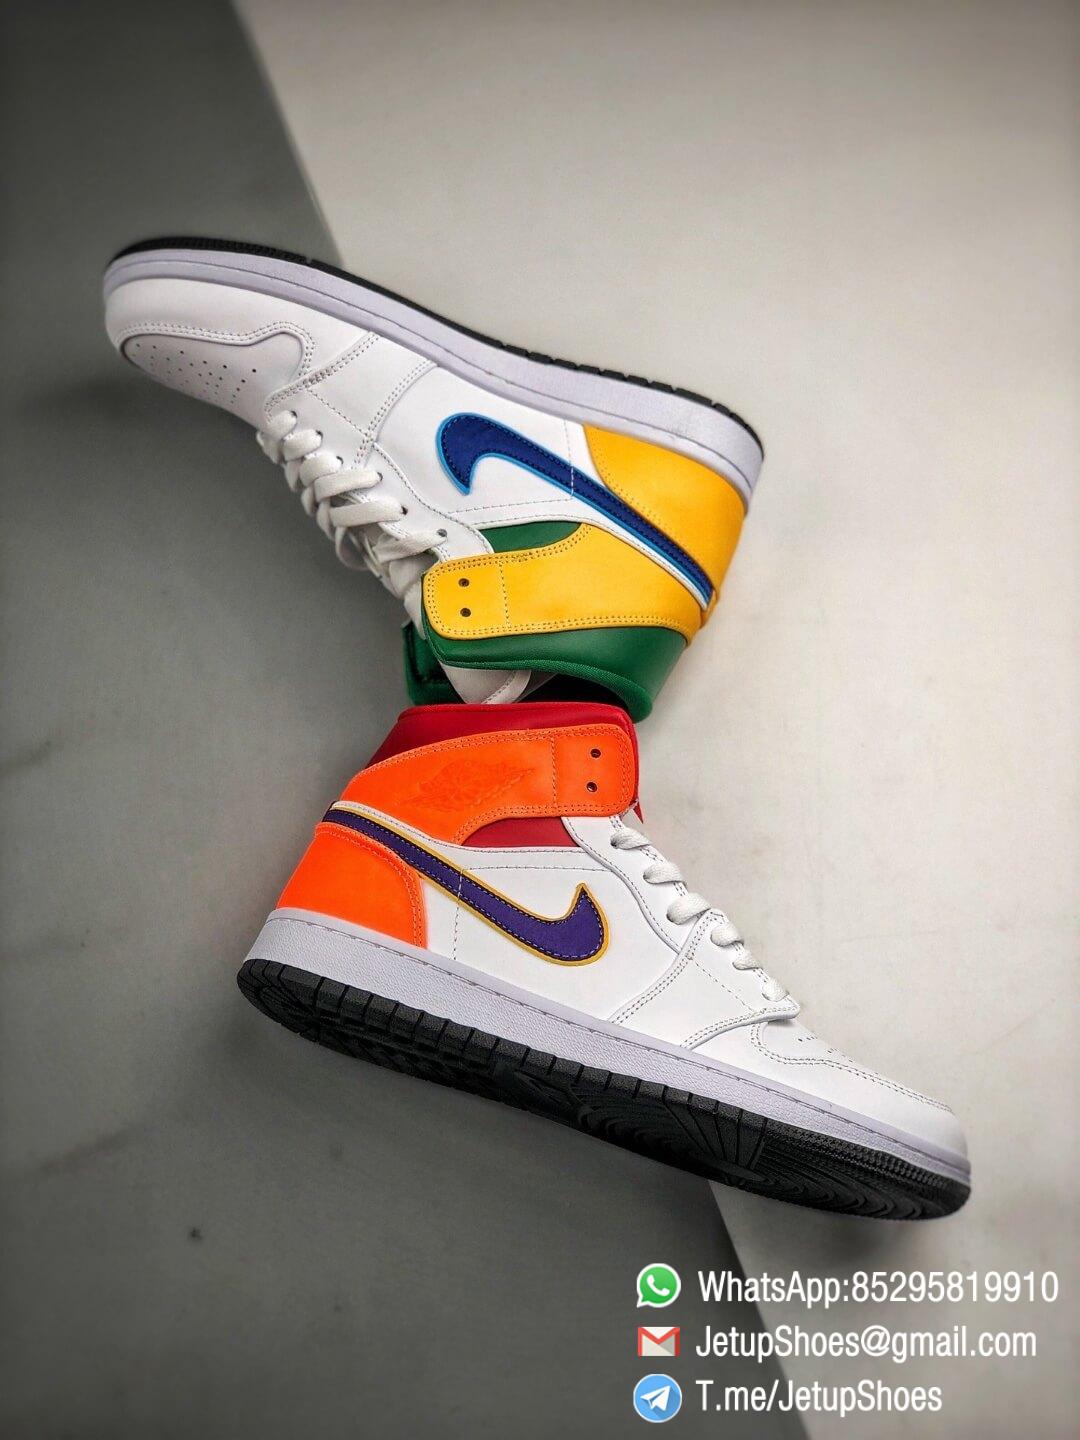 The Air Jordan 1 Mid GS White Court Purple Teal Repsneaker White Leather Upper Green Collar and Yellow Overlay 08